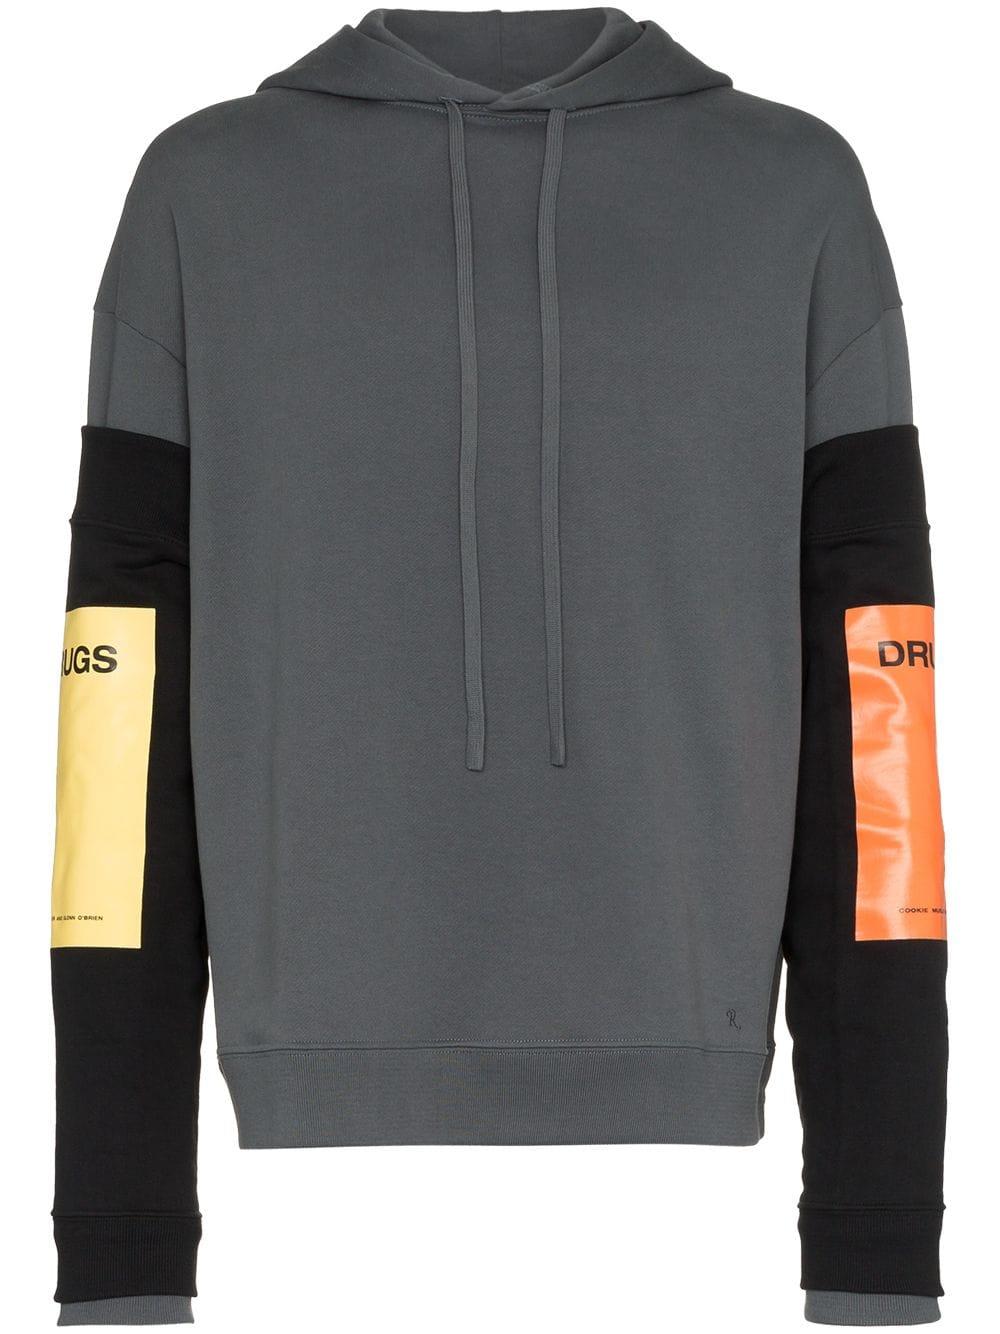 Raf Simons Hoodie With Detachable Sleeves in Grey (Gray) for Men - Lyst